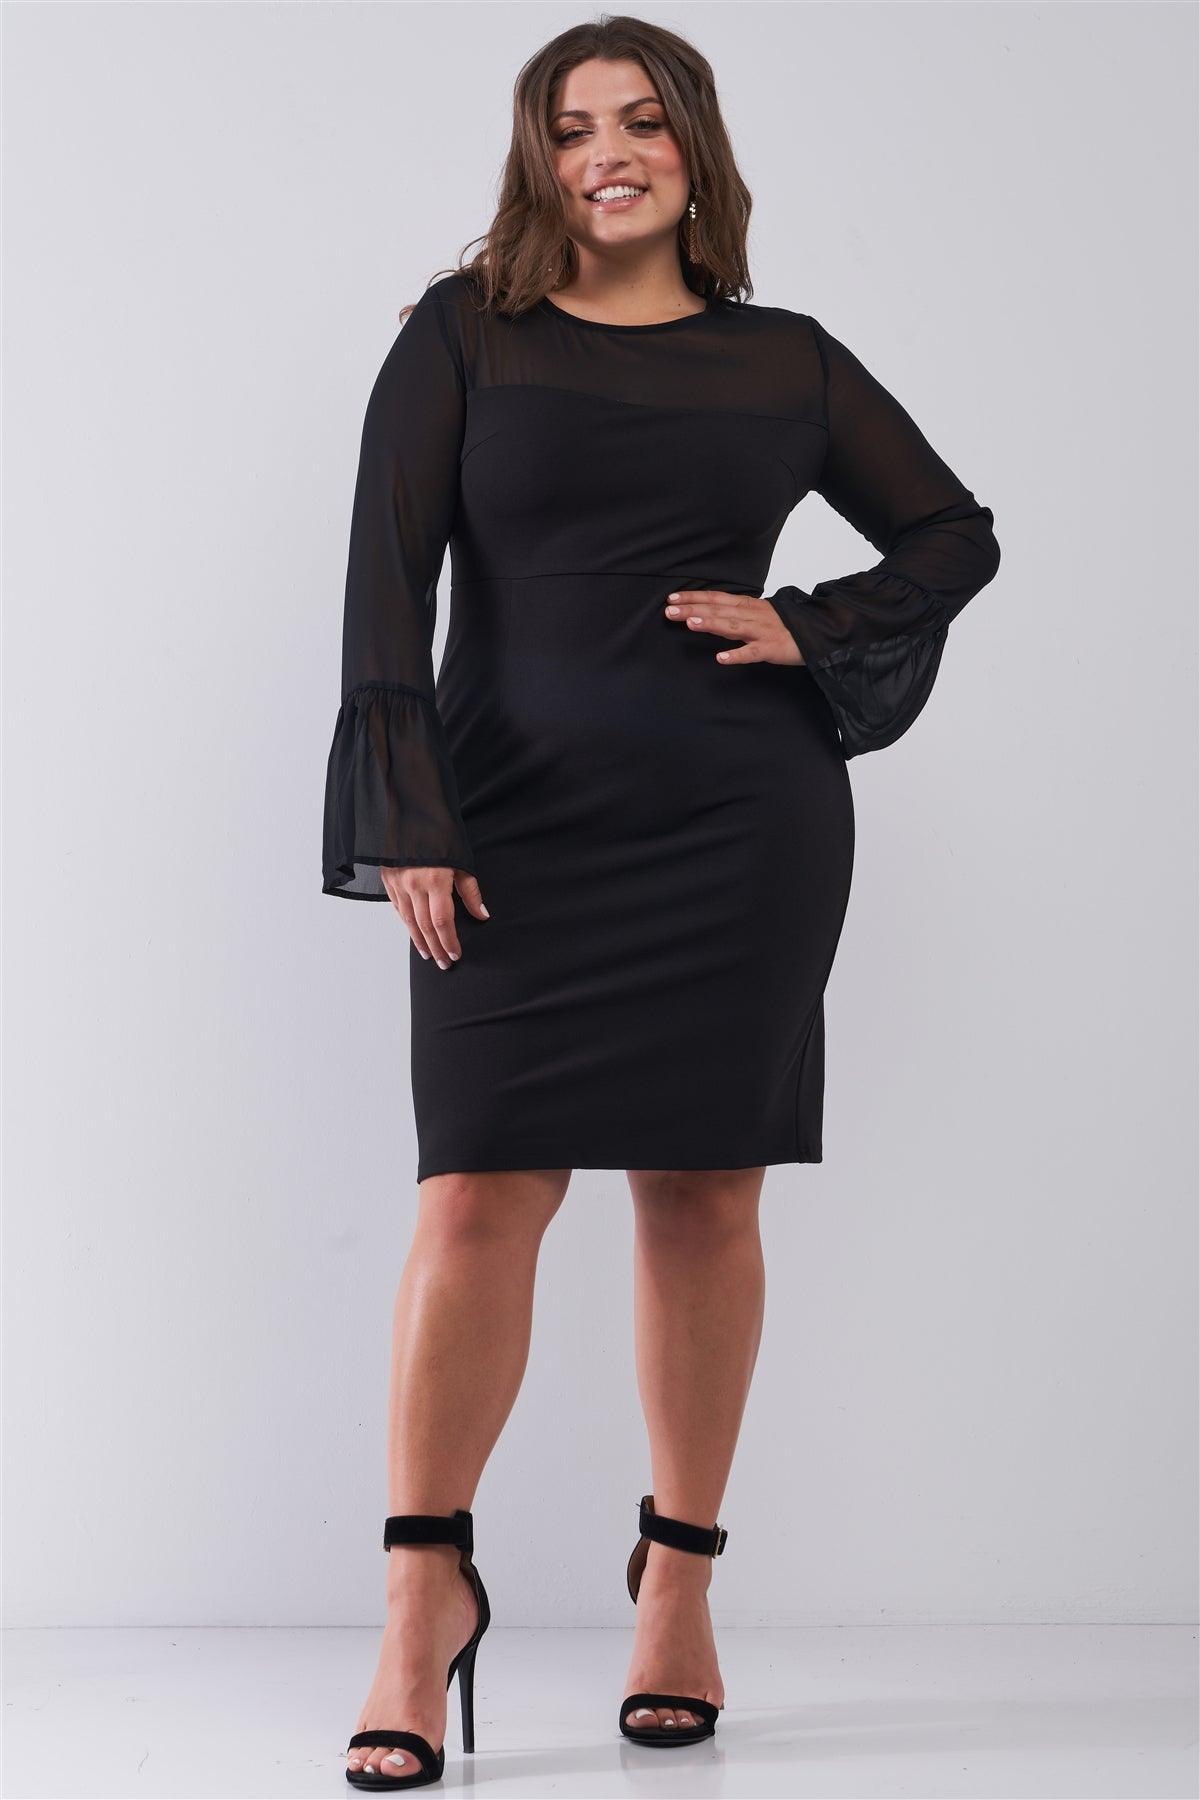 Junior Plus Size Classy Black Round Neck Flared Sheer Mesh Sleeve Detail Structured Tight Mini Dress /1-3-2